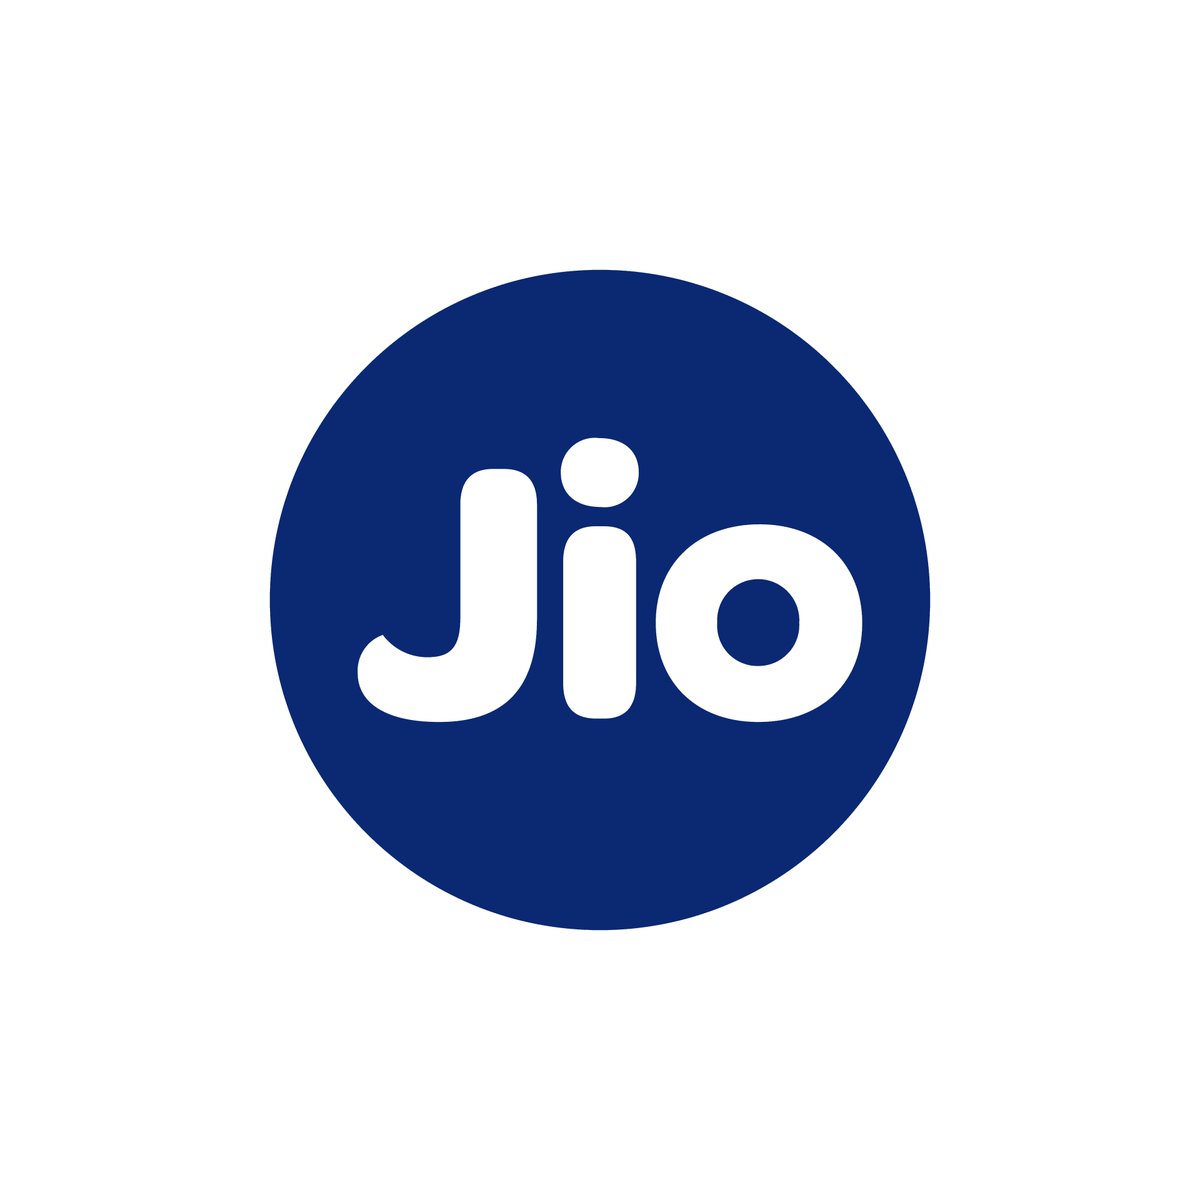 Airtel added more users then Jio in February 2024, Vi again lost users. Airtel added 1.51 million users Jio added 1.18 million users Vi lost 1.11 million users